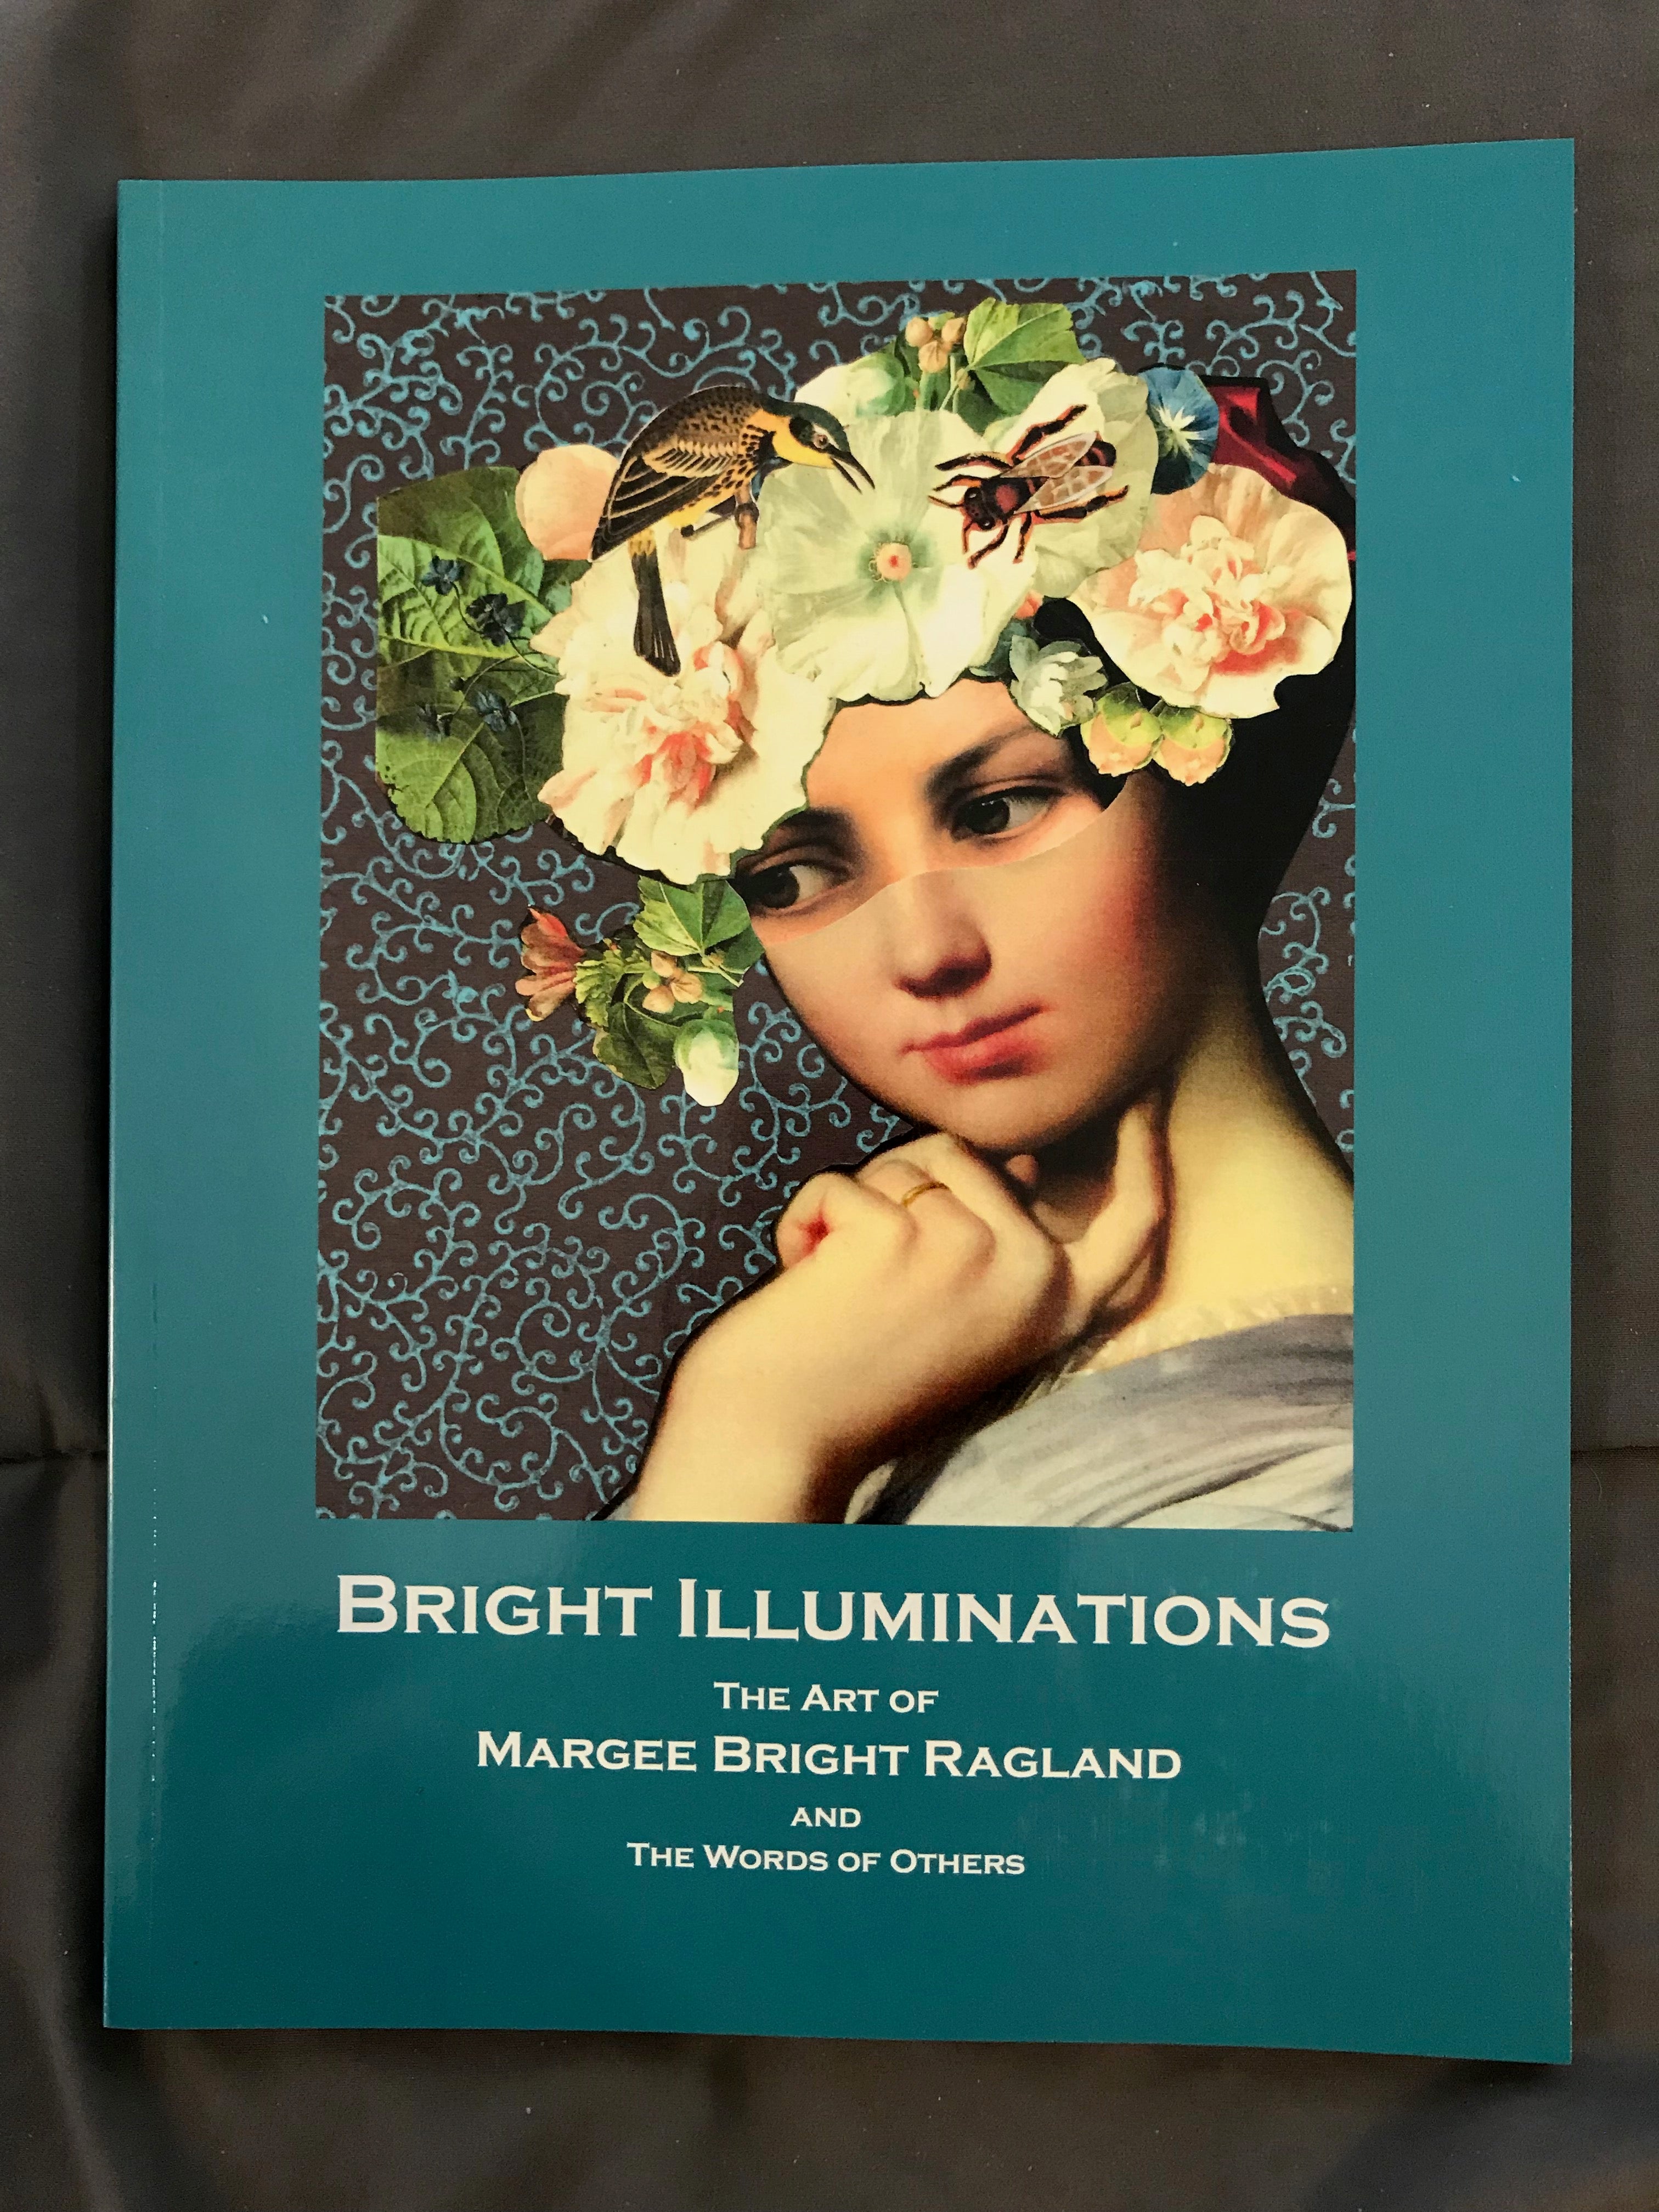 Book, "Bright Illuminations, The Art of Margee Bright Ragland and the Words of Others"